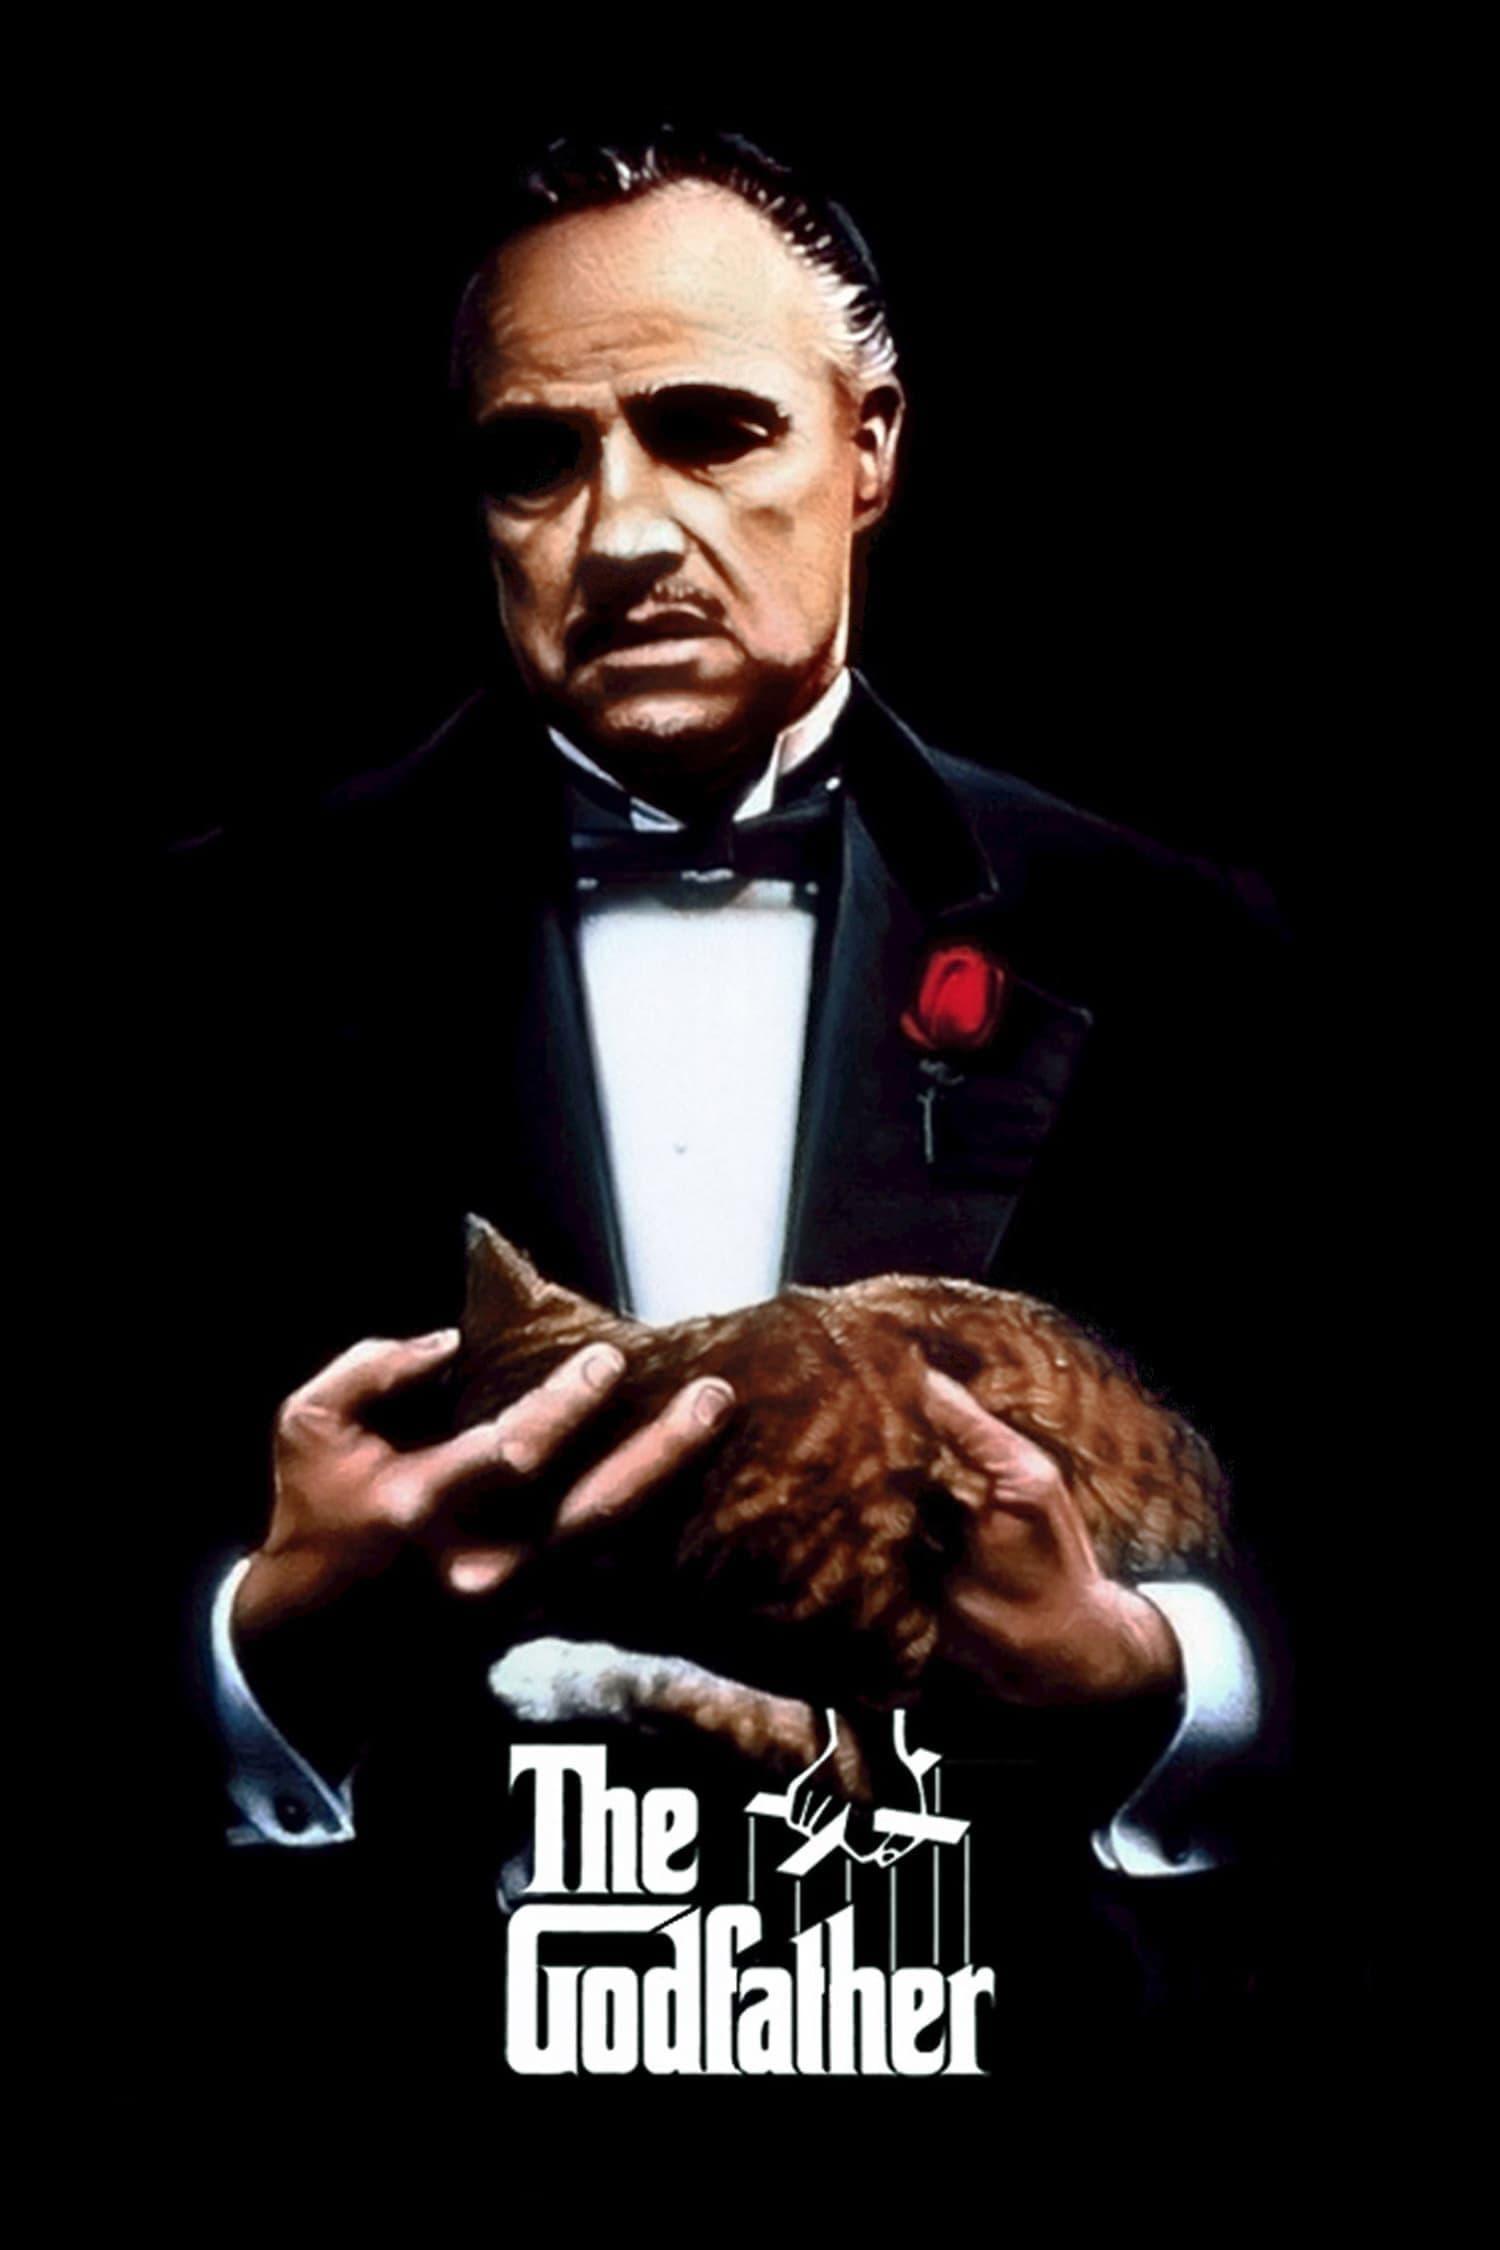 Movie poster of "The Godfather"